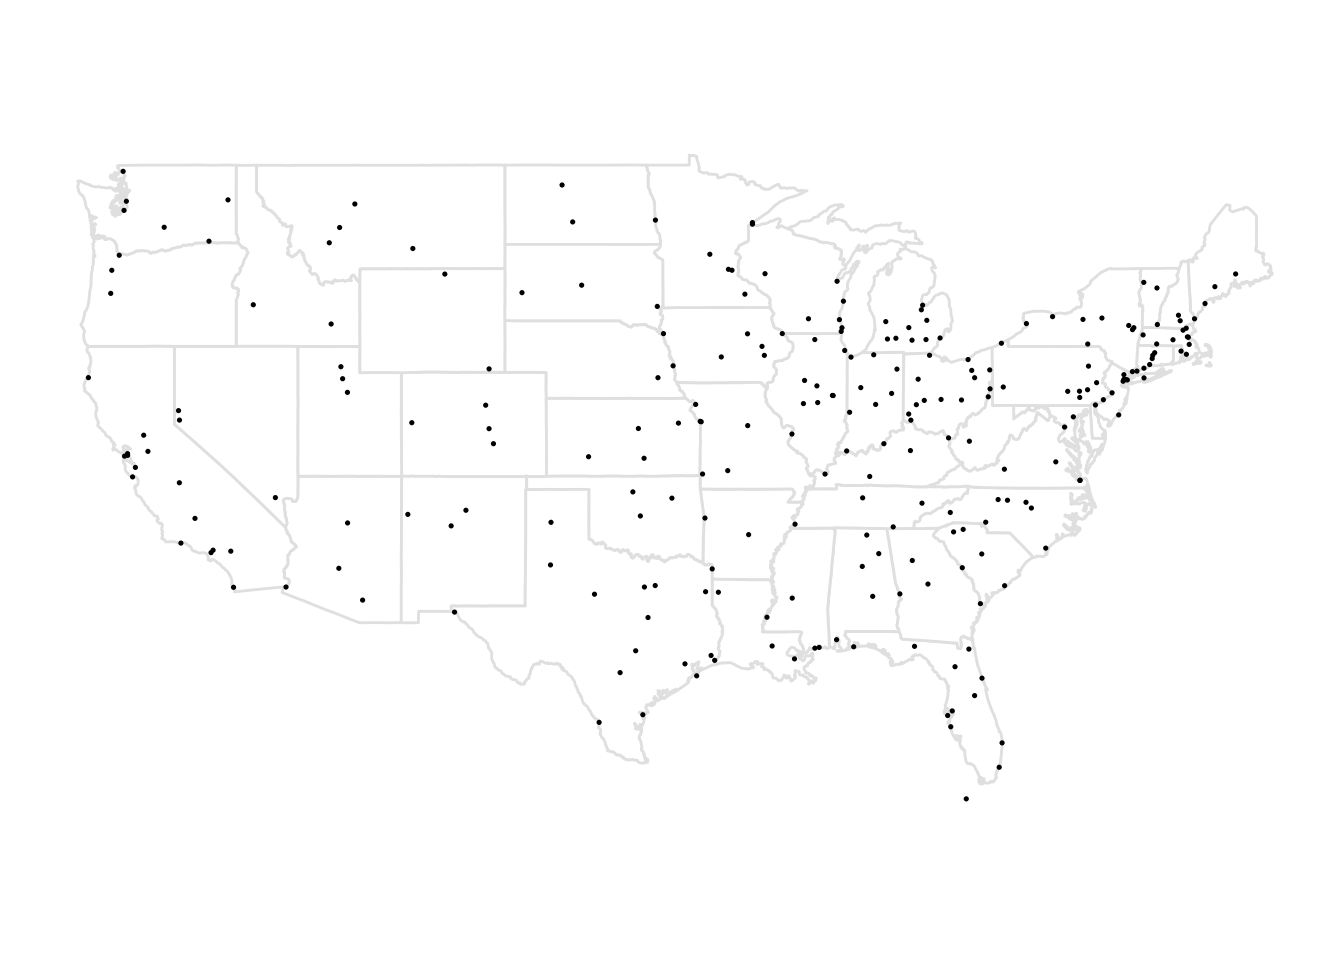 The 257 cities that must be visited in the Salesman problem (reprise).